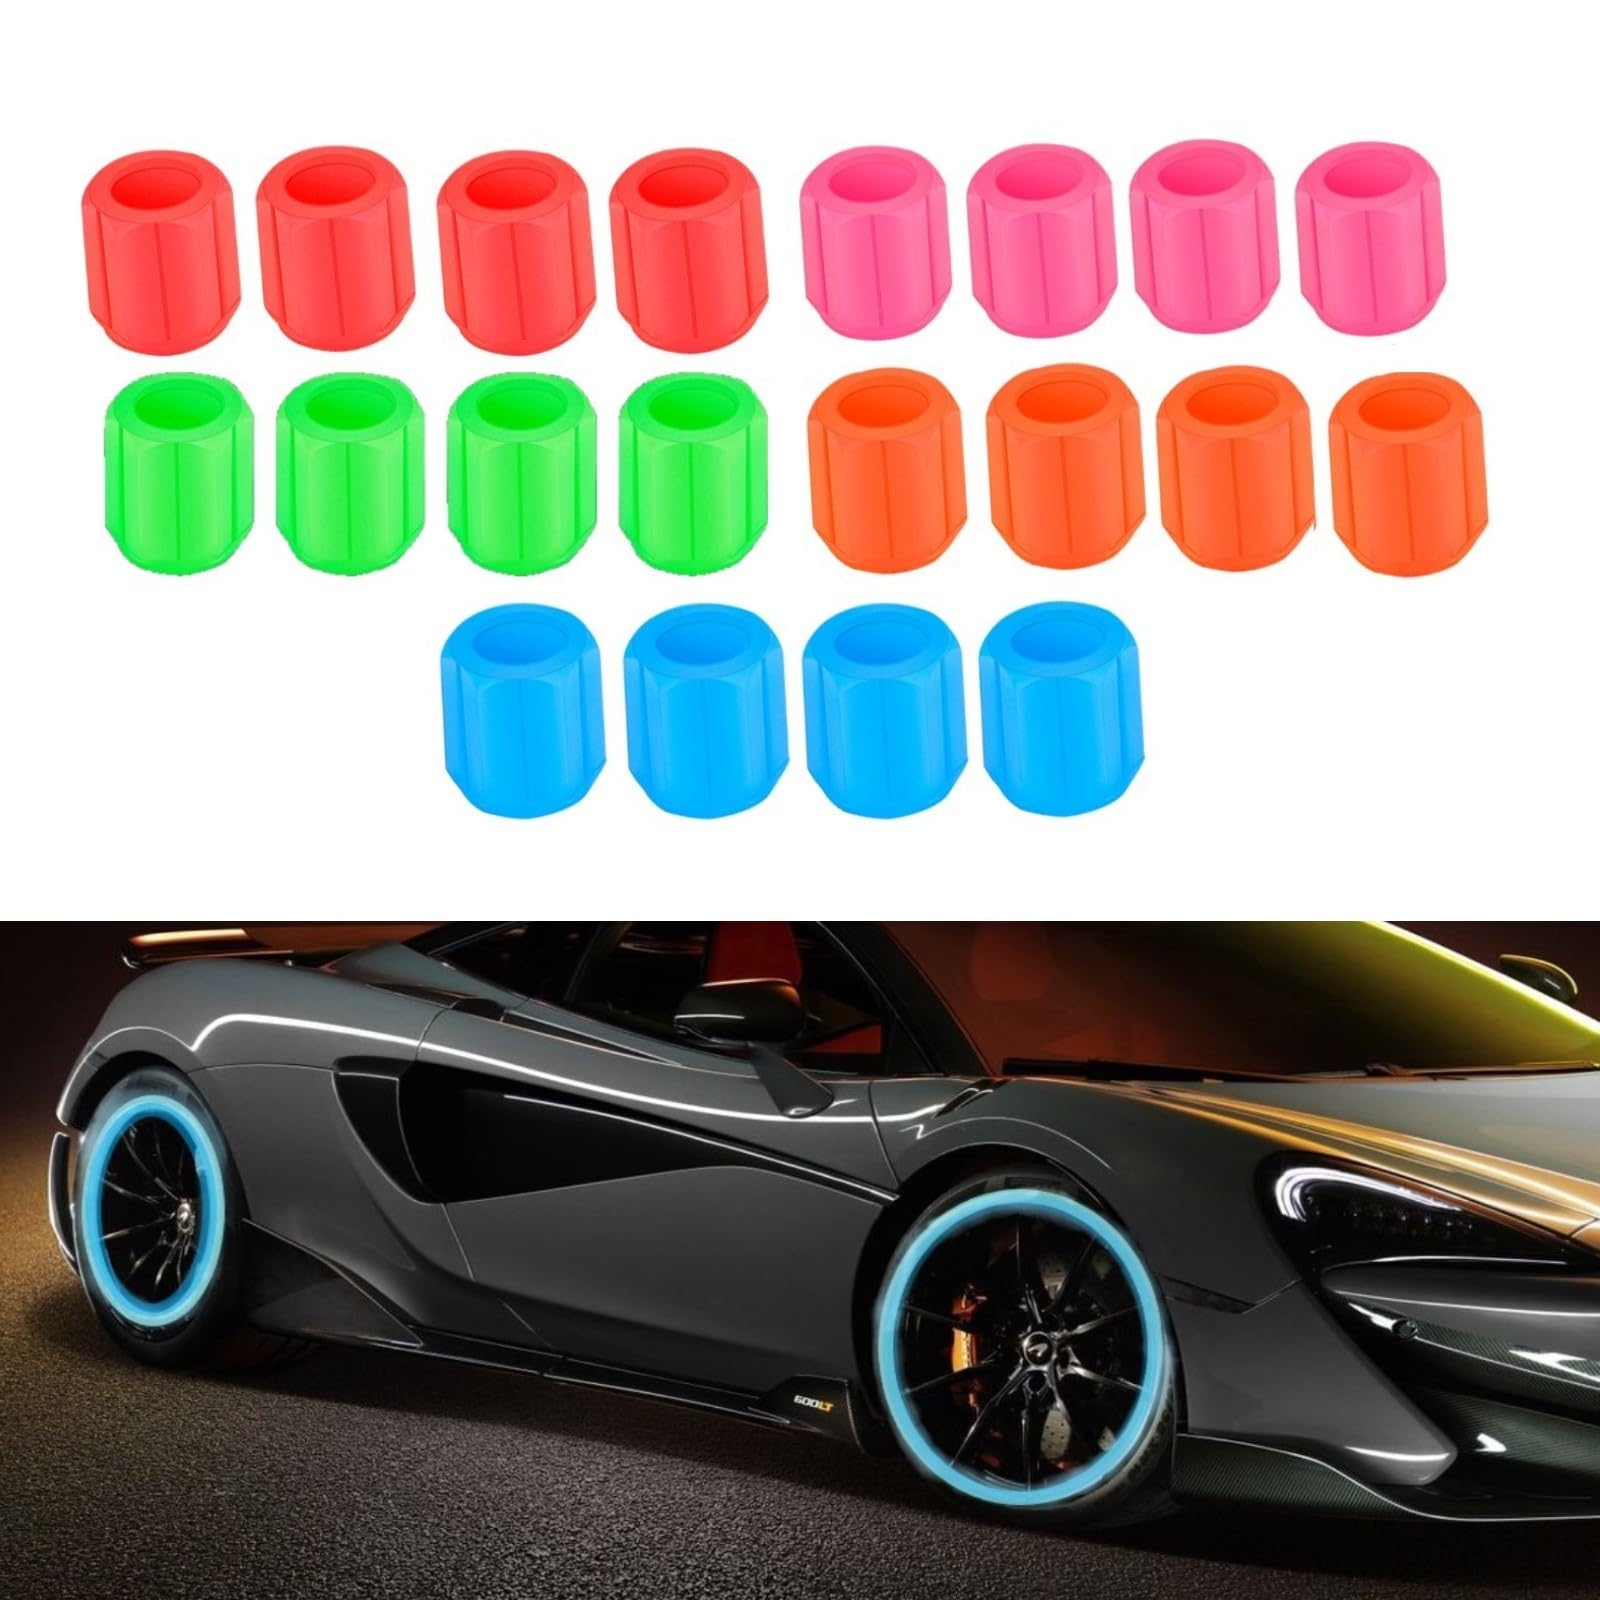 Valve Caps Car, Pack of 20 Universal Fluorescent Tyre Valve Caps, Valve Caps Tyre Valve Stem Caps for Bicycle Motorcycle Car,Glow in The Dark Tire Valve Caps Car Decoration (Multi-Colour) von Toulifly